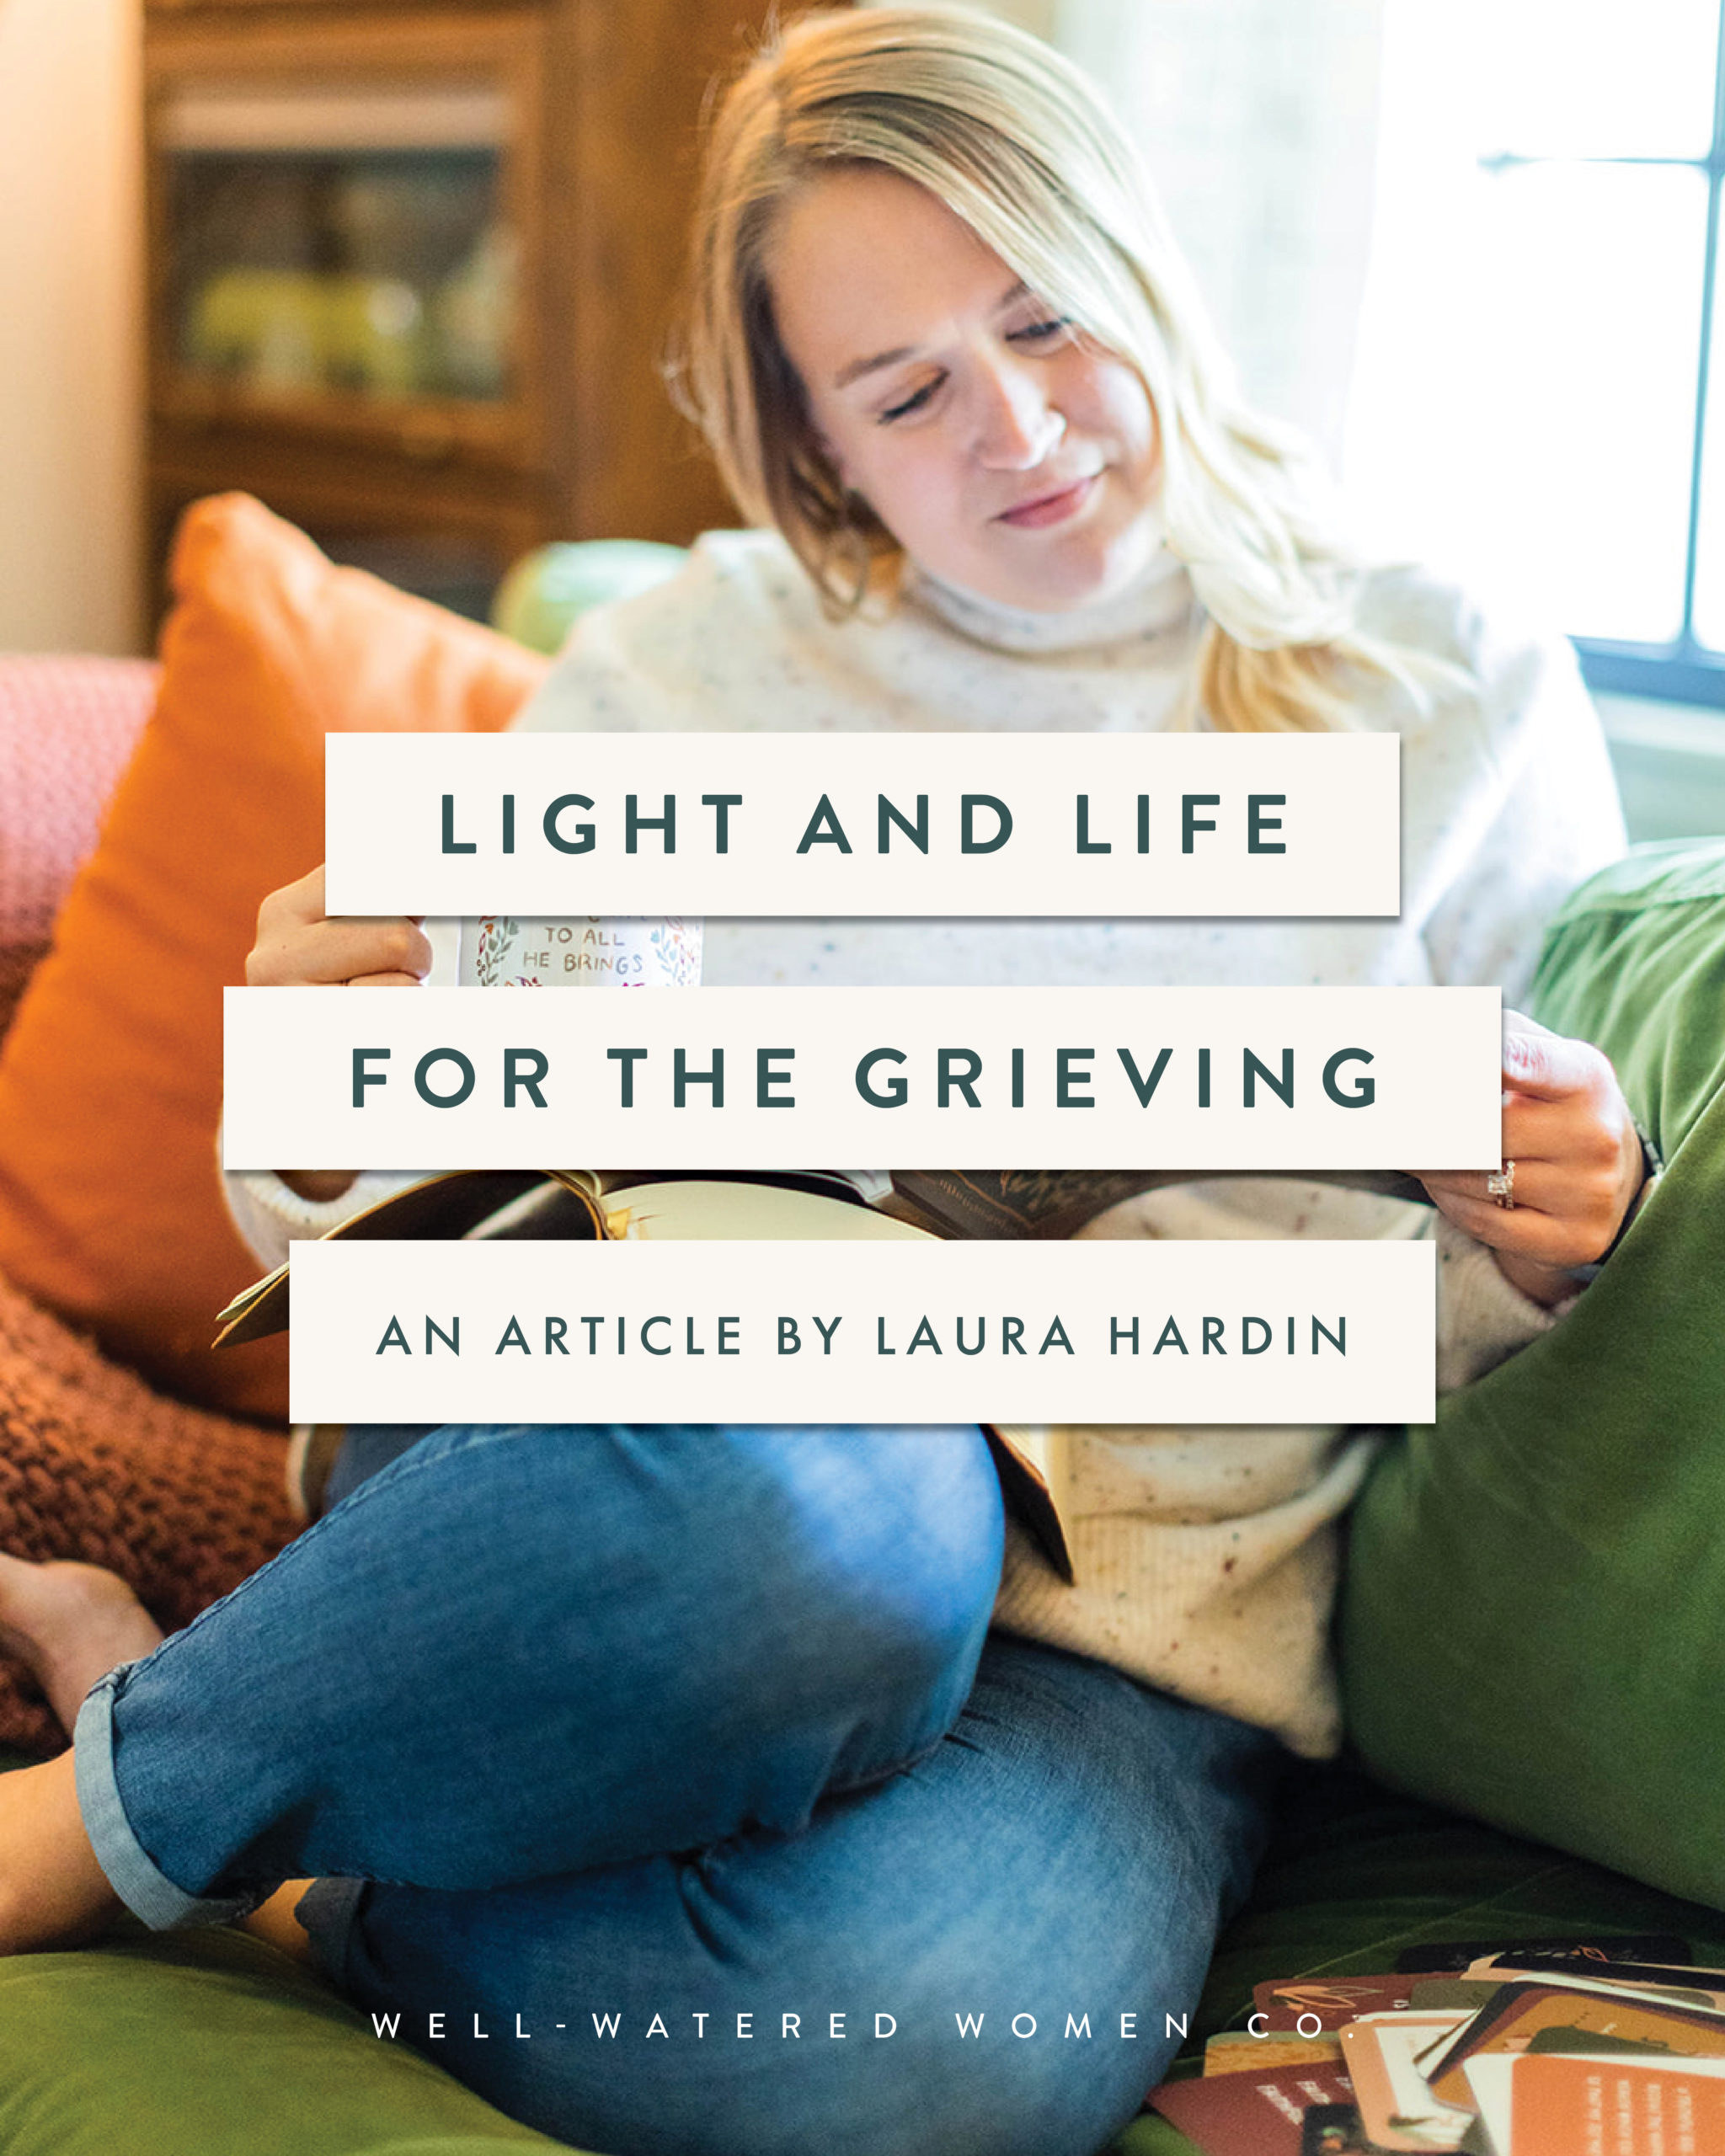 Light and Life for the Grieving - an article from Well-Watered Women